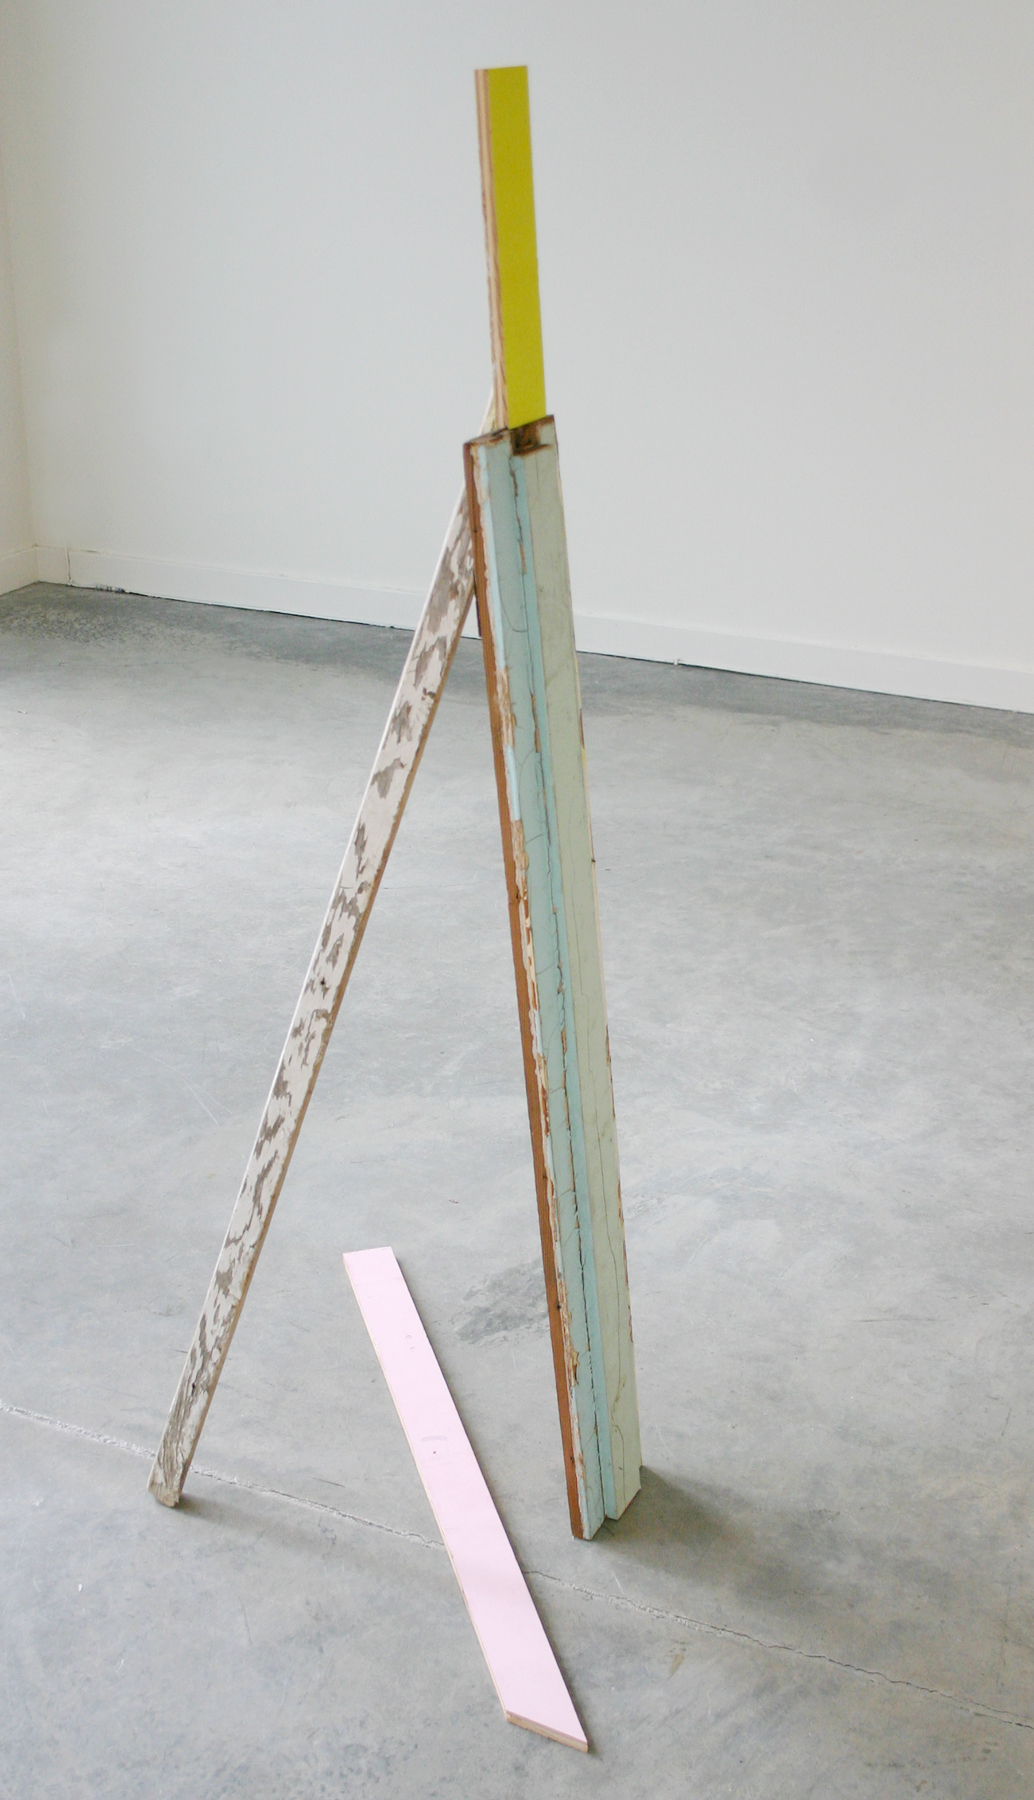   KIRK STOLLER   Untitled (propped),&nbsp; wood and paint, 51" x 24" x 27", 2011 